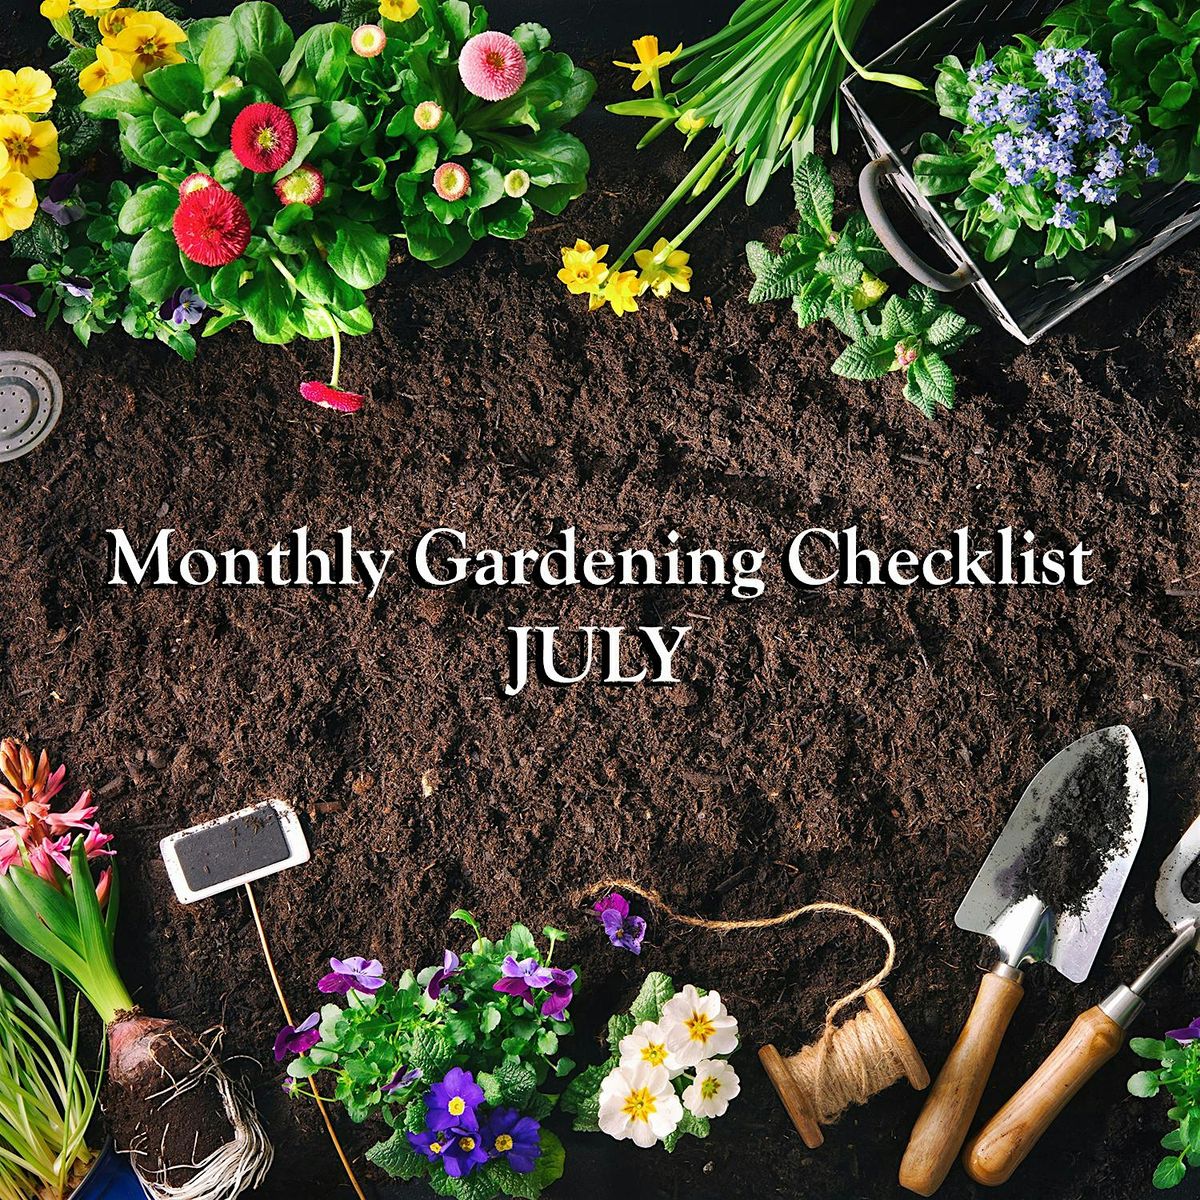 LIVE STREAM: Monthly Gardening Checklist for July with David